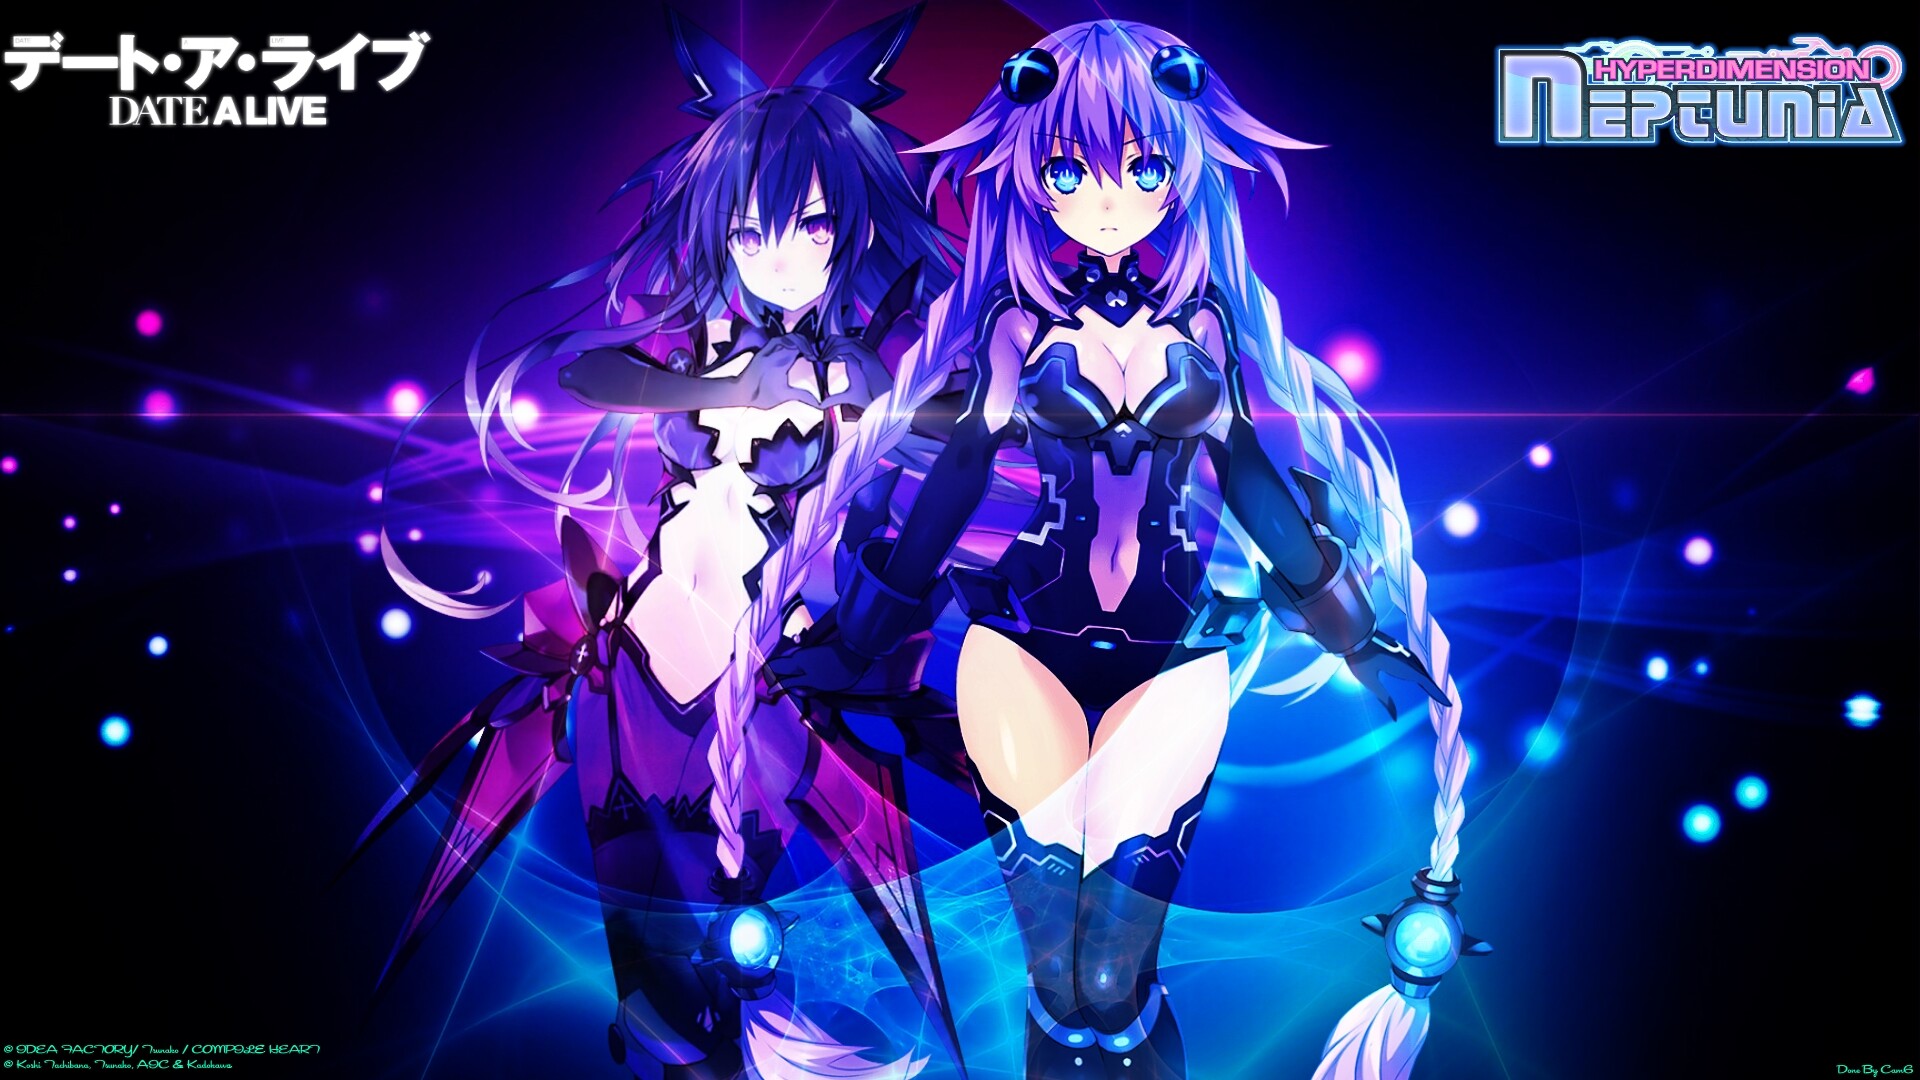 ArtStation - Date A Live Neptunia Crossover Wallpapers